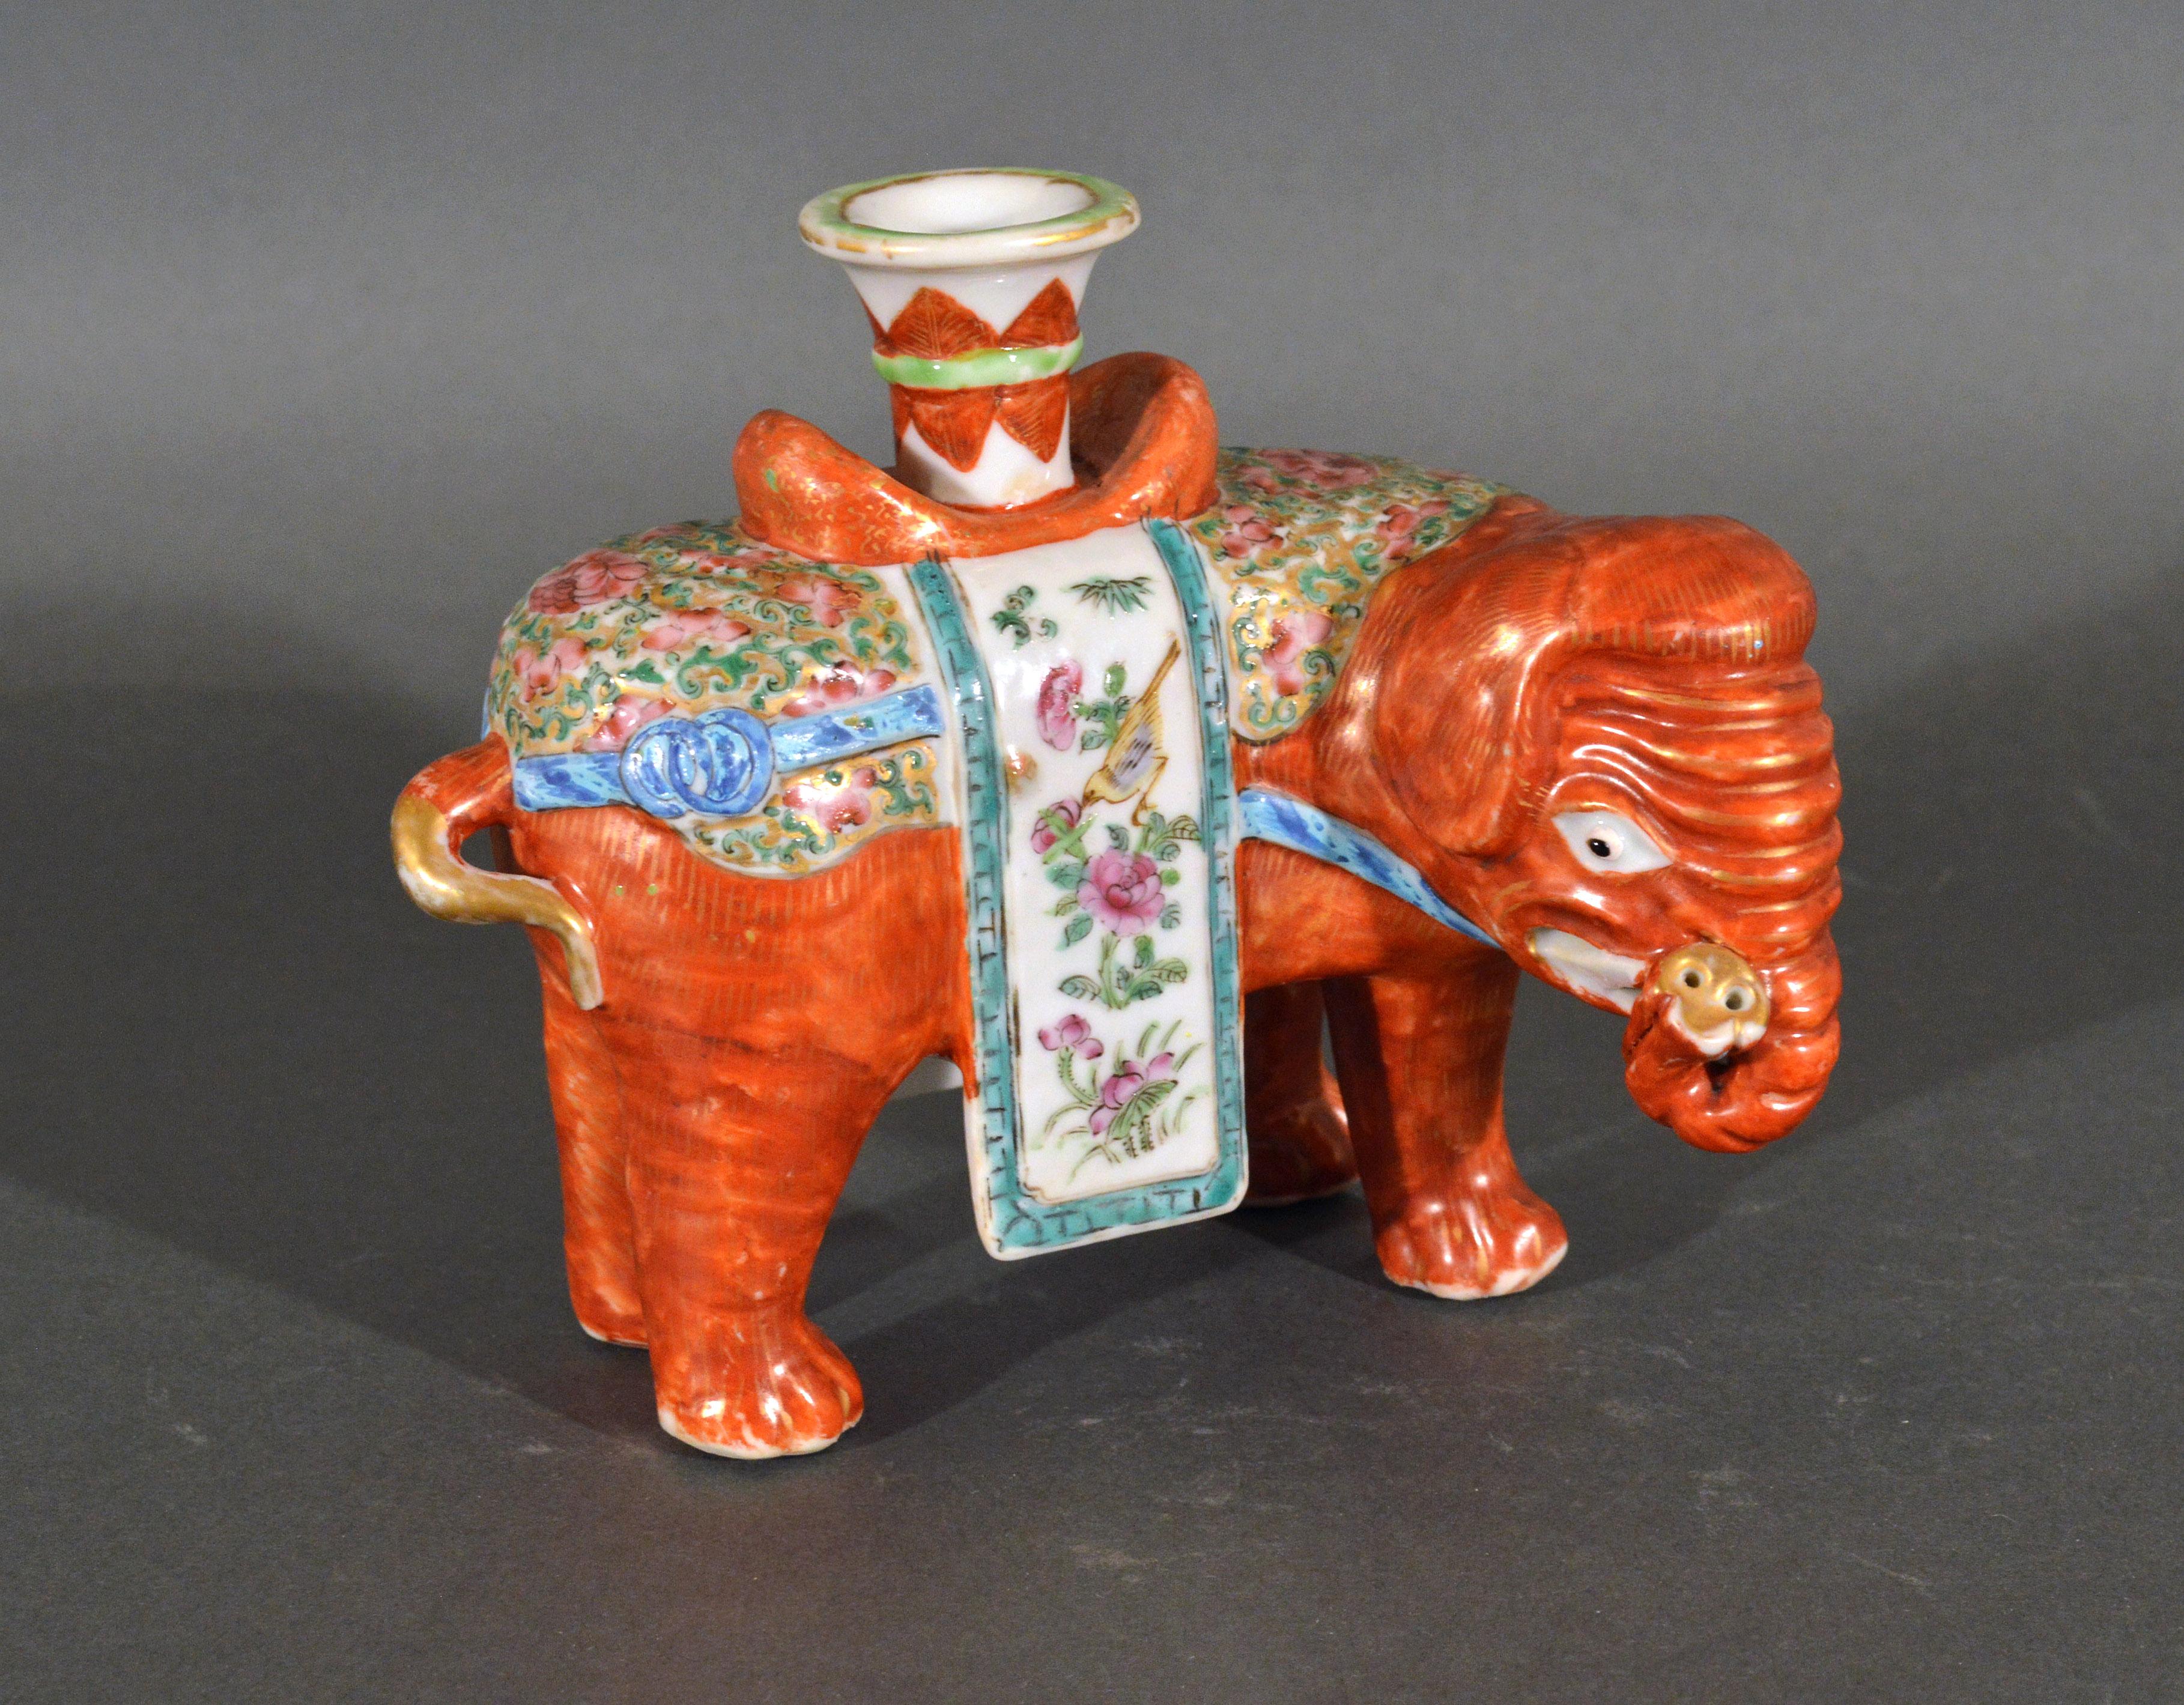 Chinese Export porcelain canton famille rose elephant modeled as a candlestick,
circa 1860 

The standing Chinese Export porcelain elephant with its trunk up is painted in an iron-red with gilt decoration and caparisoned. On its back is a gu-form